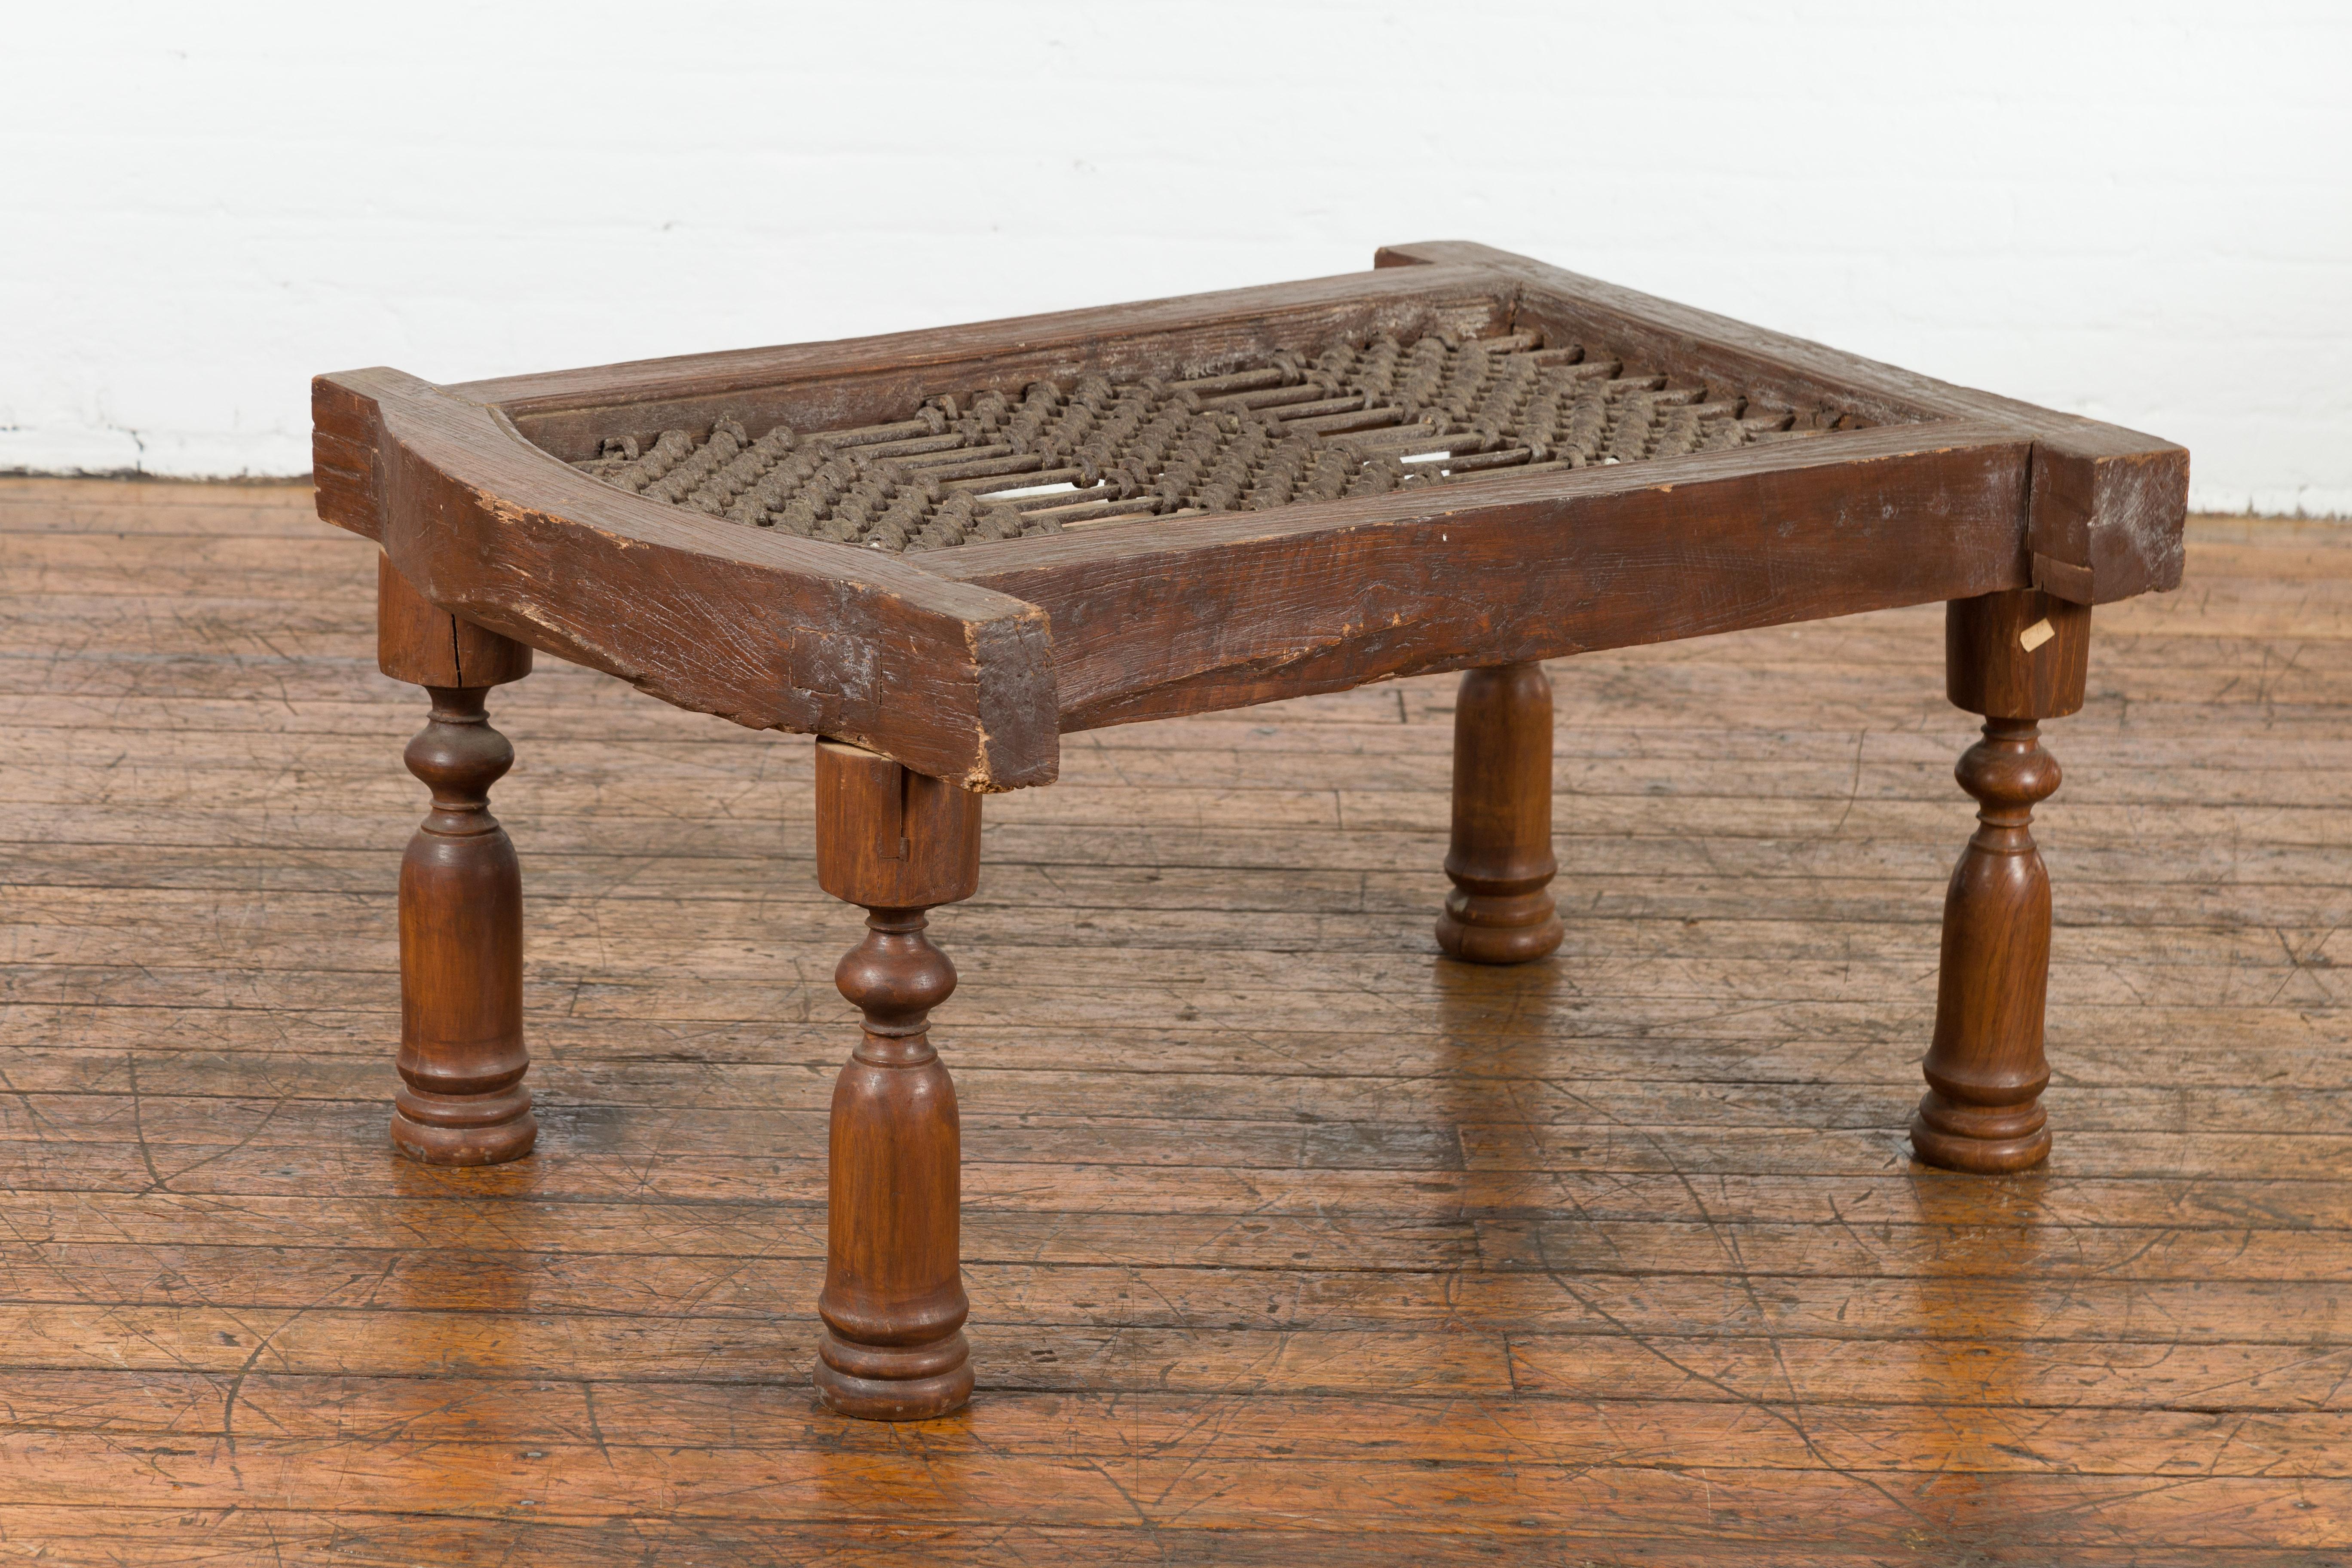 Turned Rustic 19th Century Indian Iron Window Grate Made Into a Coffee Table For Sale